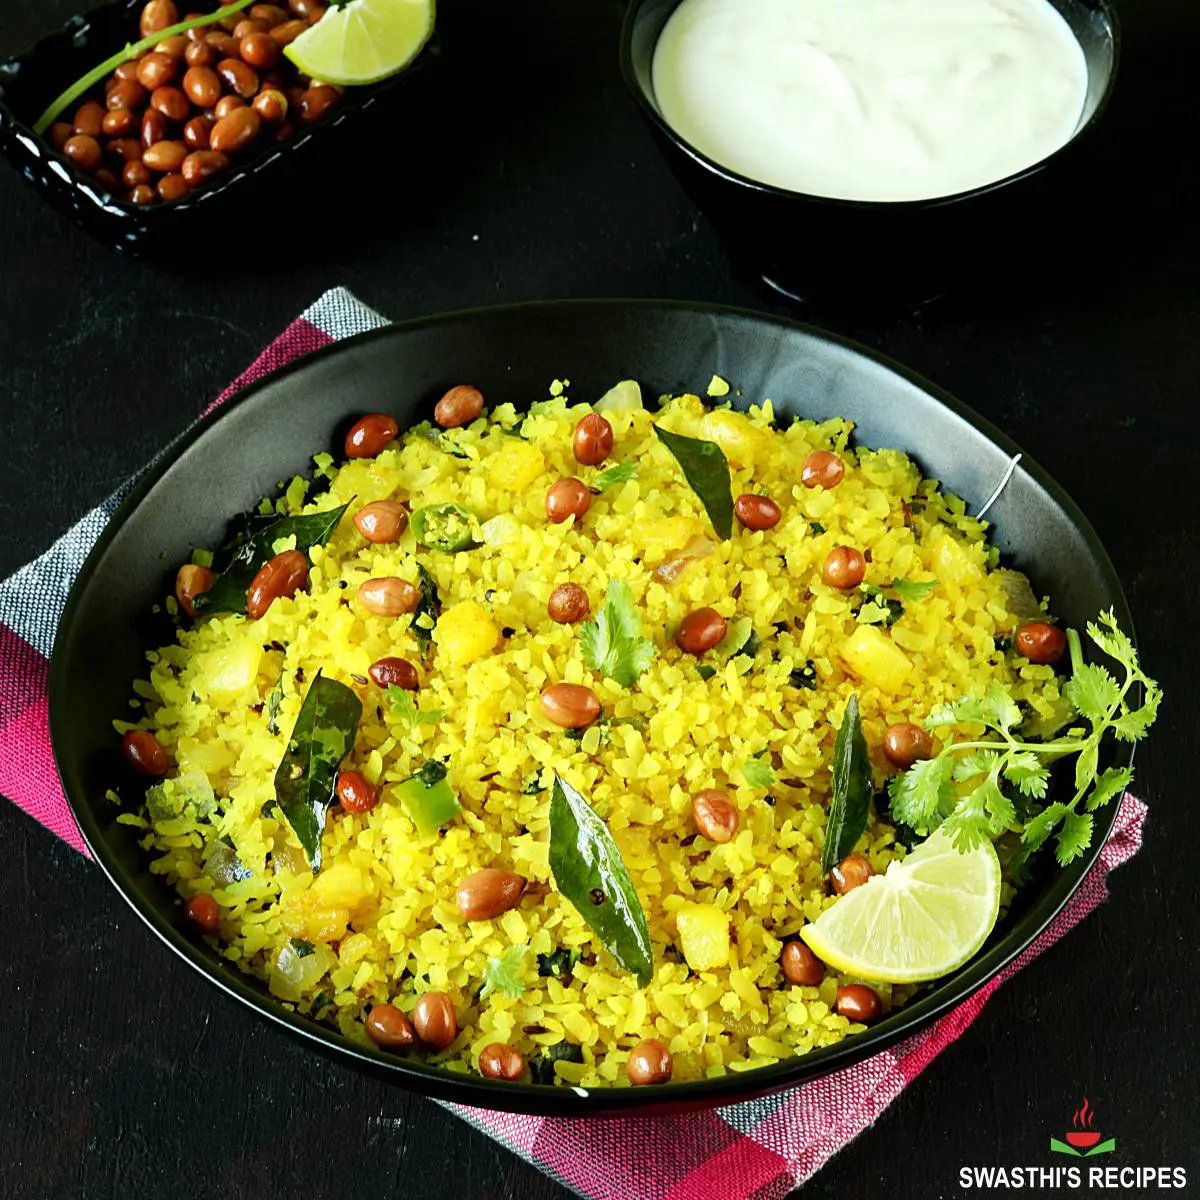 Poha is flattened rice, served in a black plate